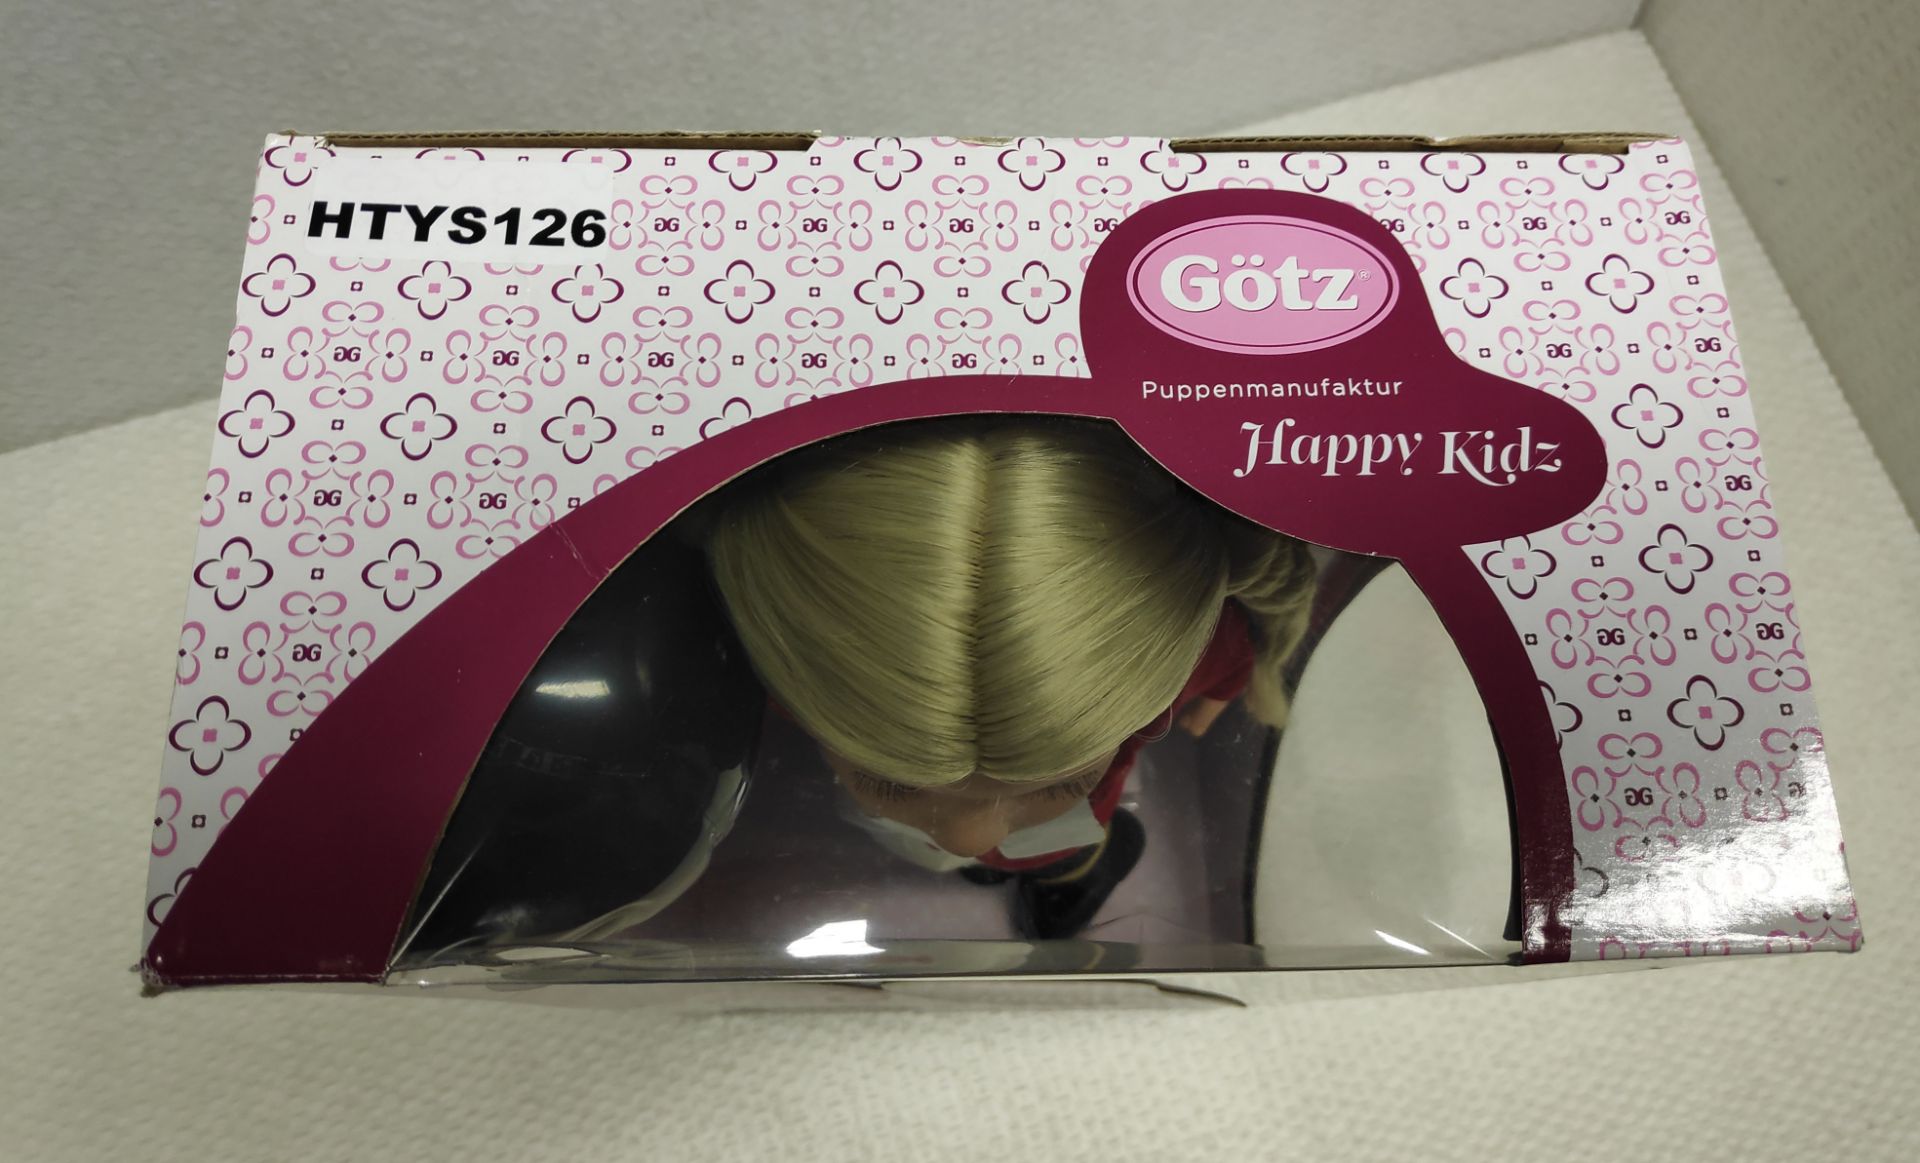 1 x Gotz Happy Kidz Anna Horse Riding Doll - Designed for Harrods - New/Boxed - Image 5 of 7